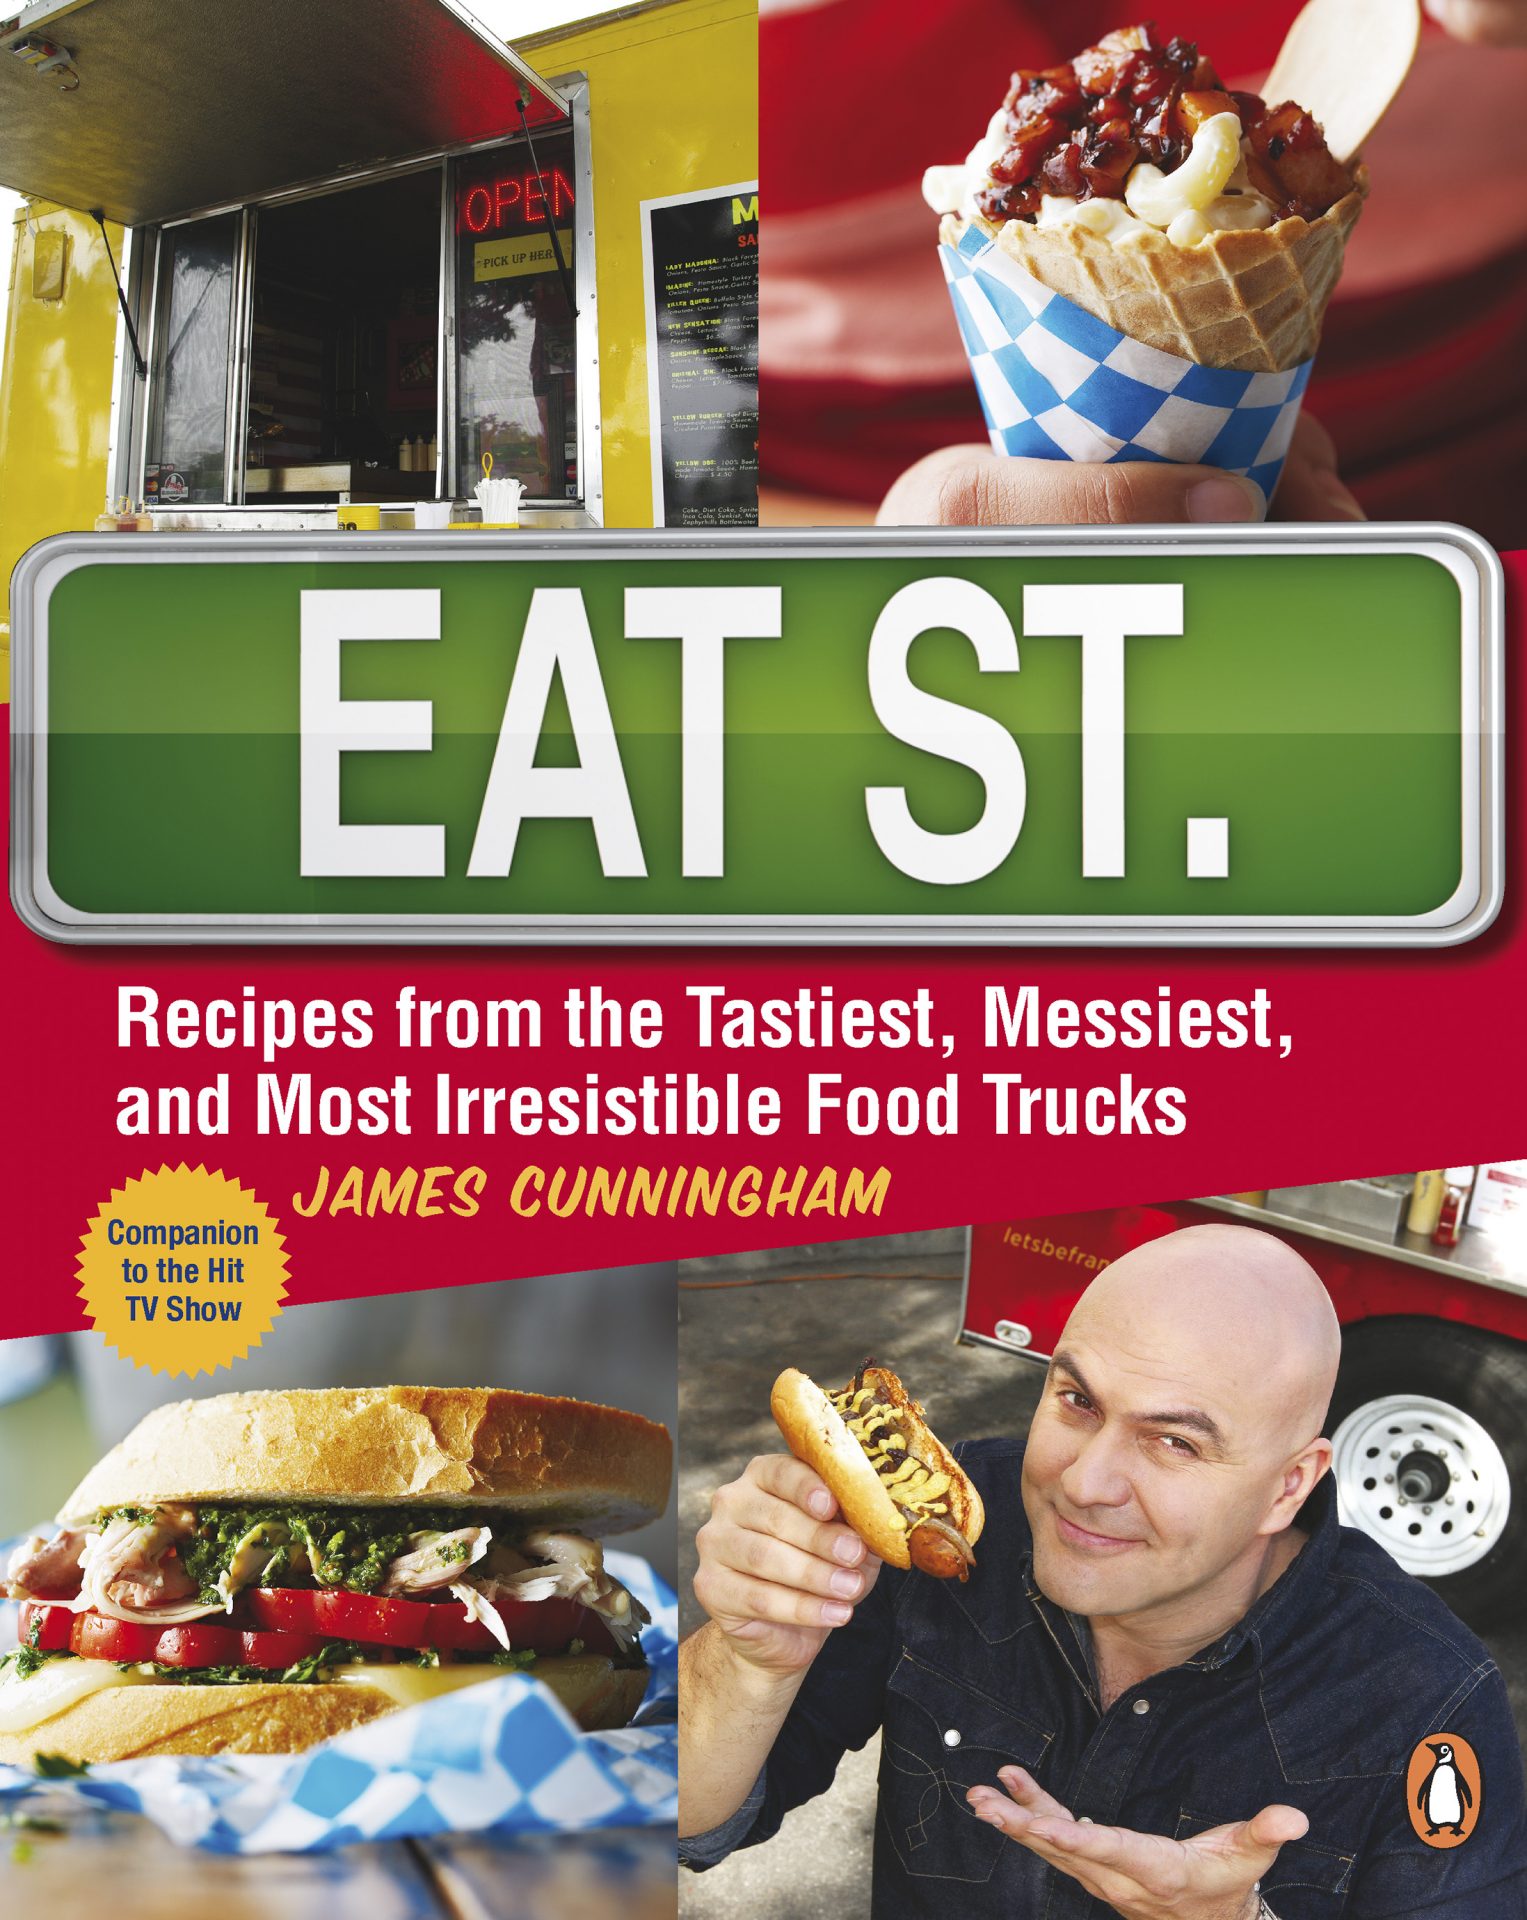 Eat St……..The Book Based on the TV Show